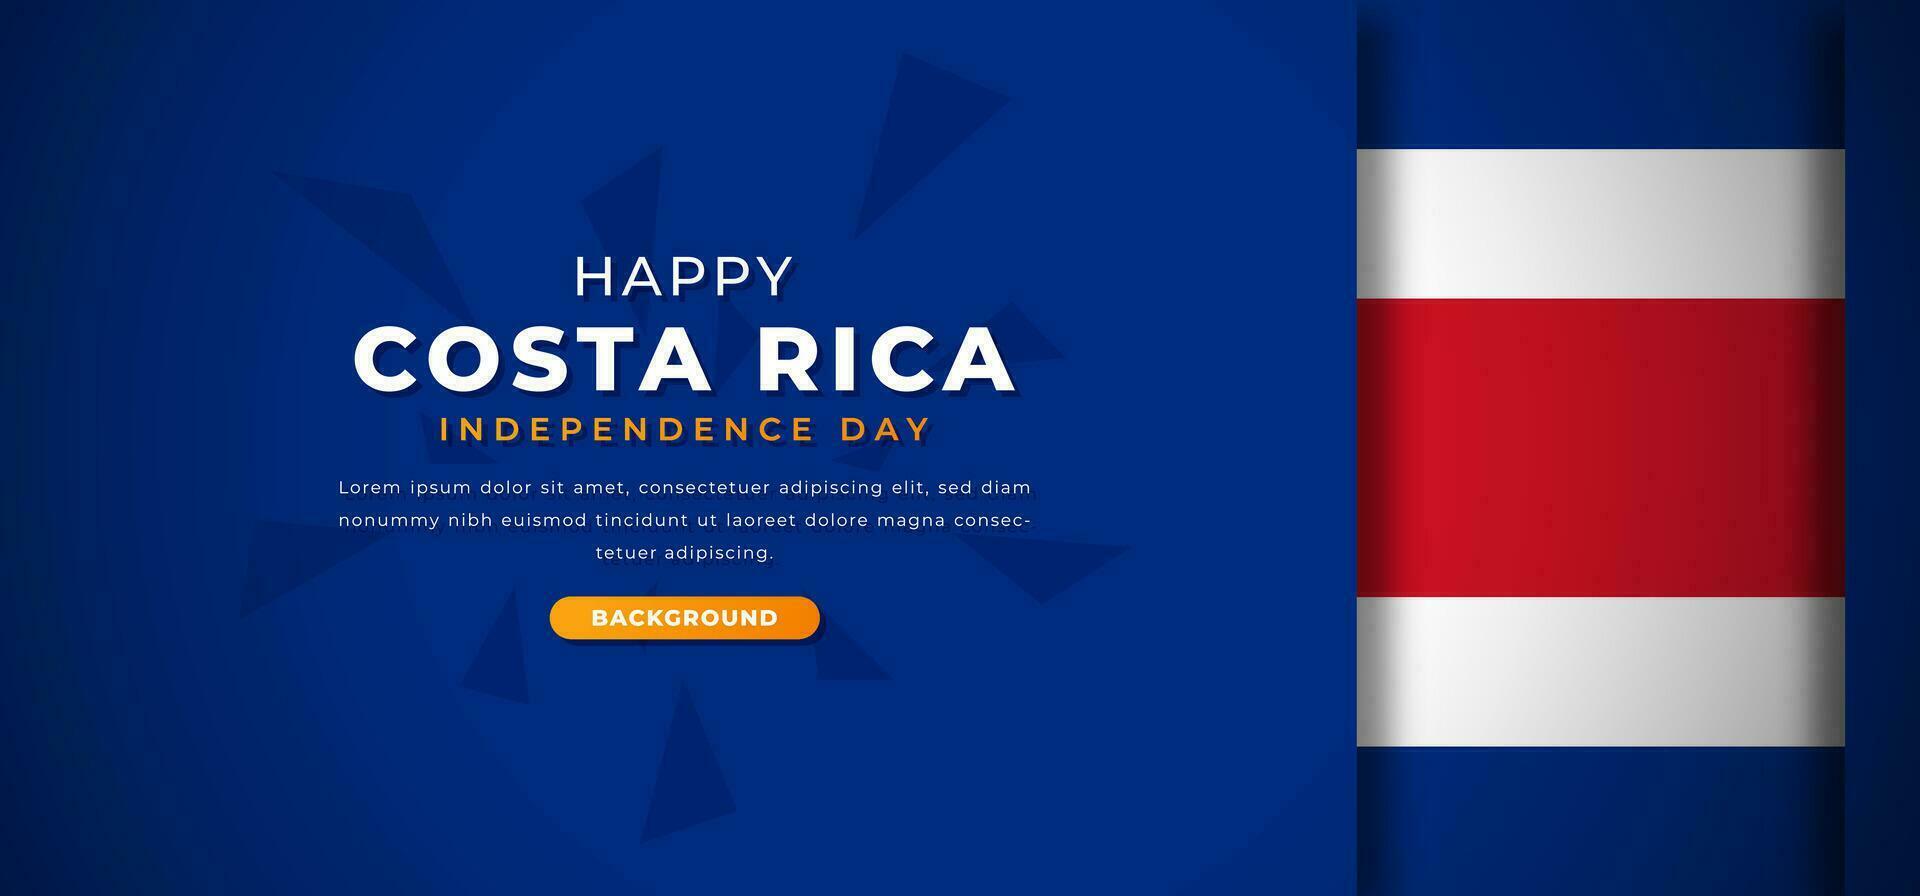 Happy Costa Rica Independence Day Design Paper Cut Shapes Background Illustration for Poster, Banner, Advertising, Greeting Card vector